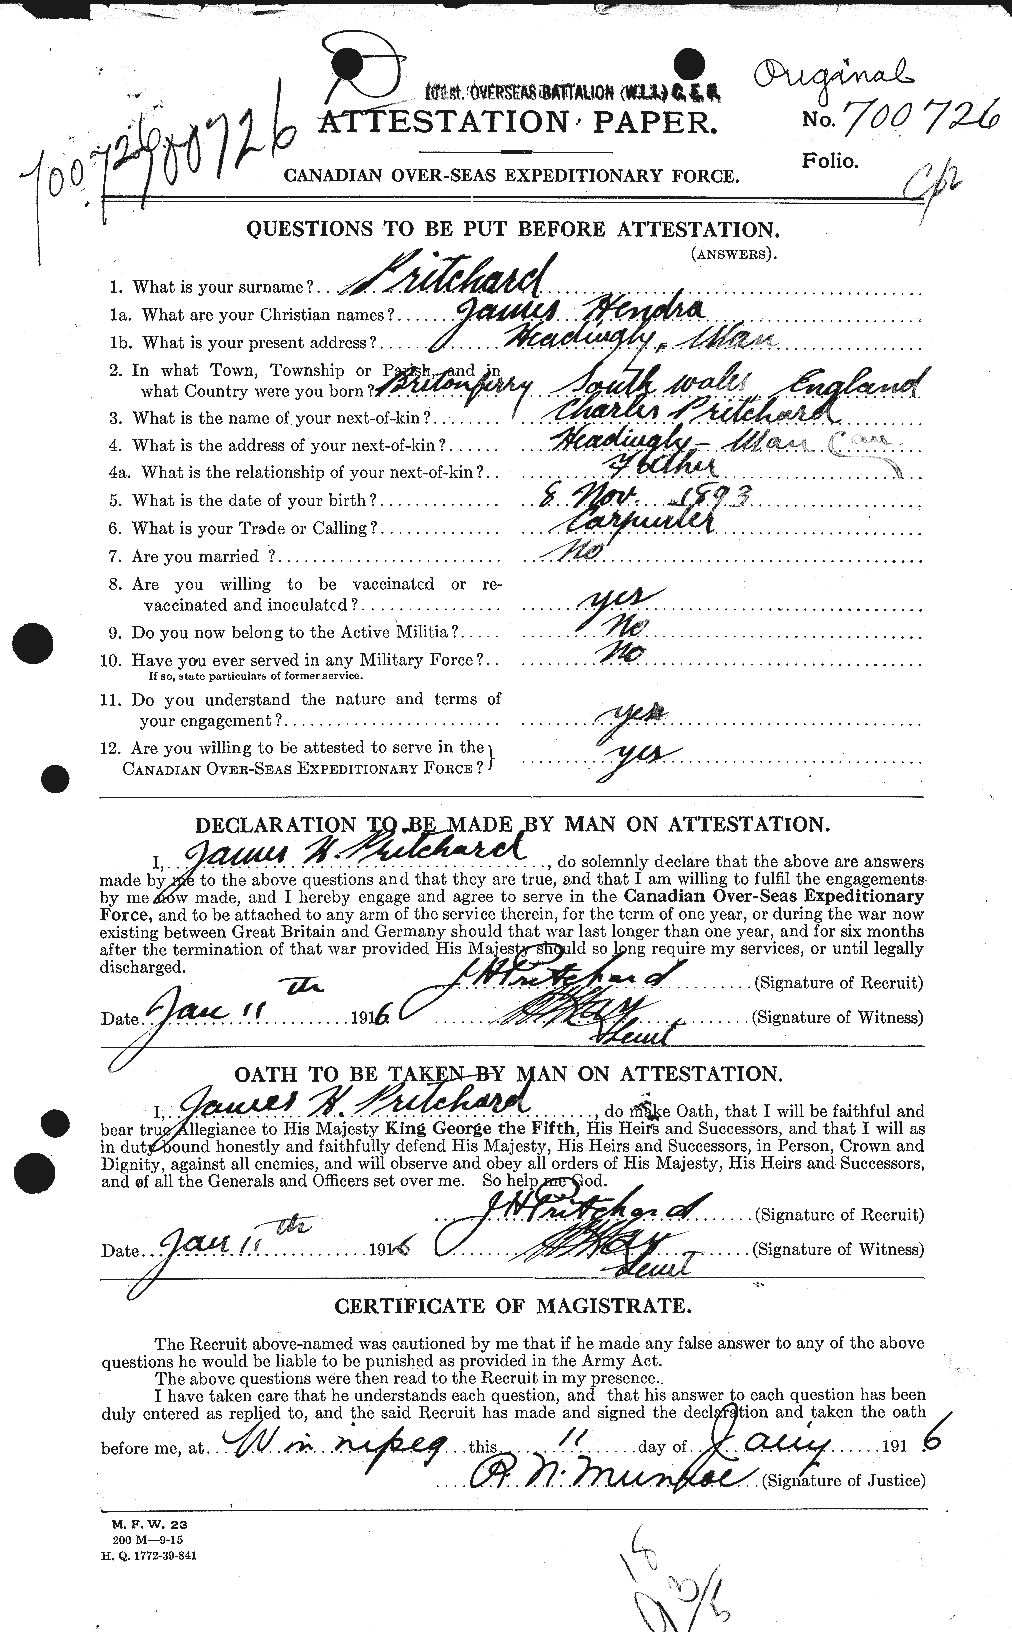 Personnel Records of the First World War - CEF 588579a